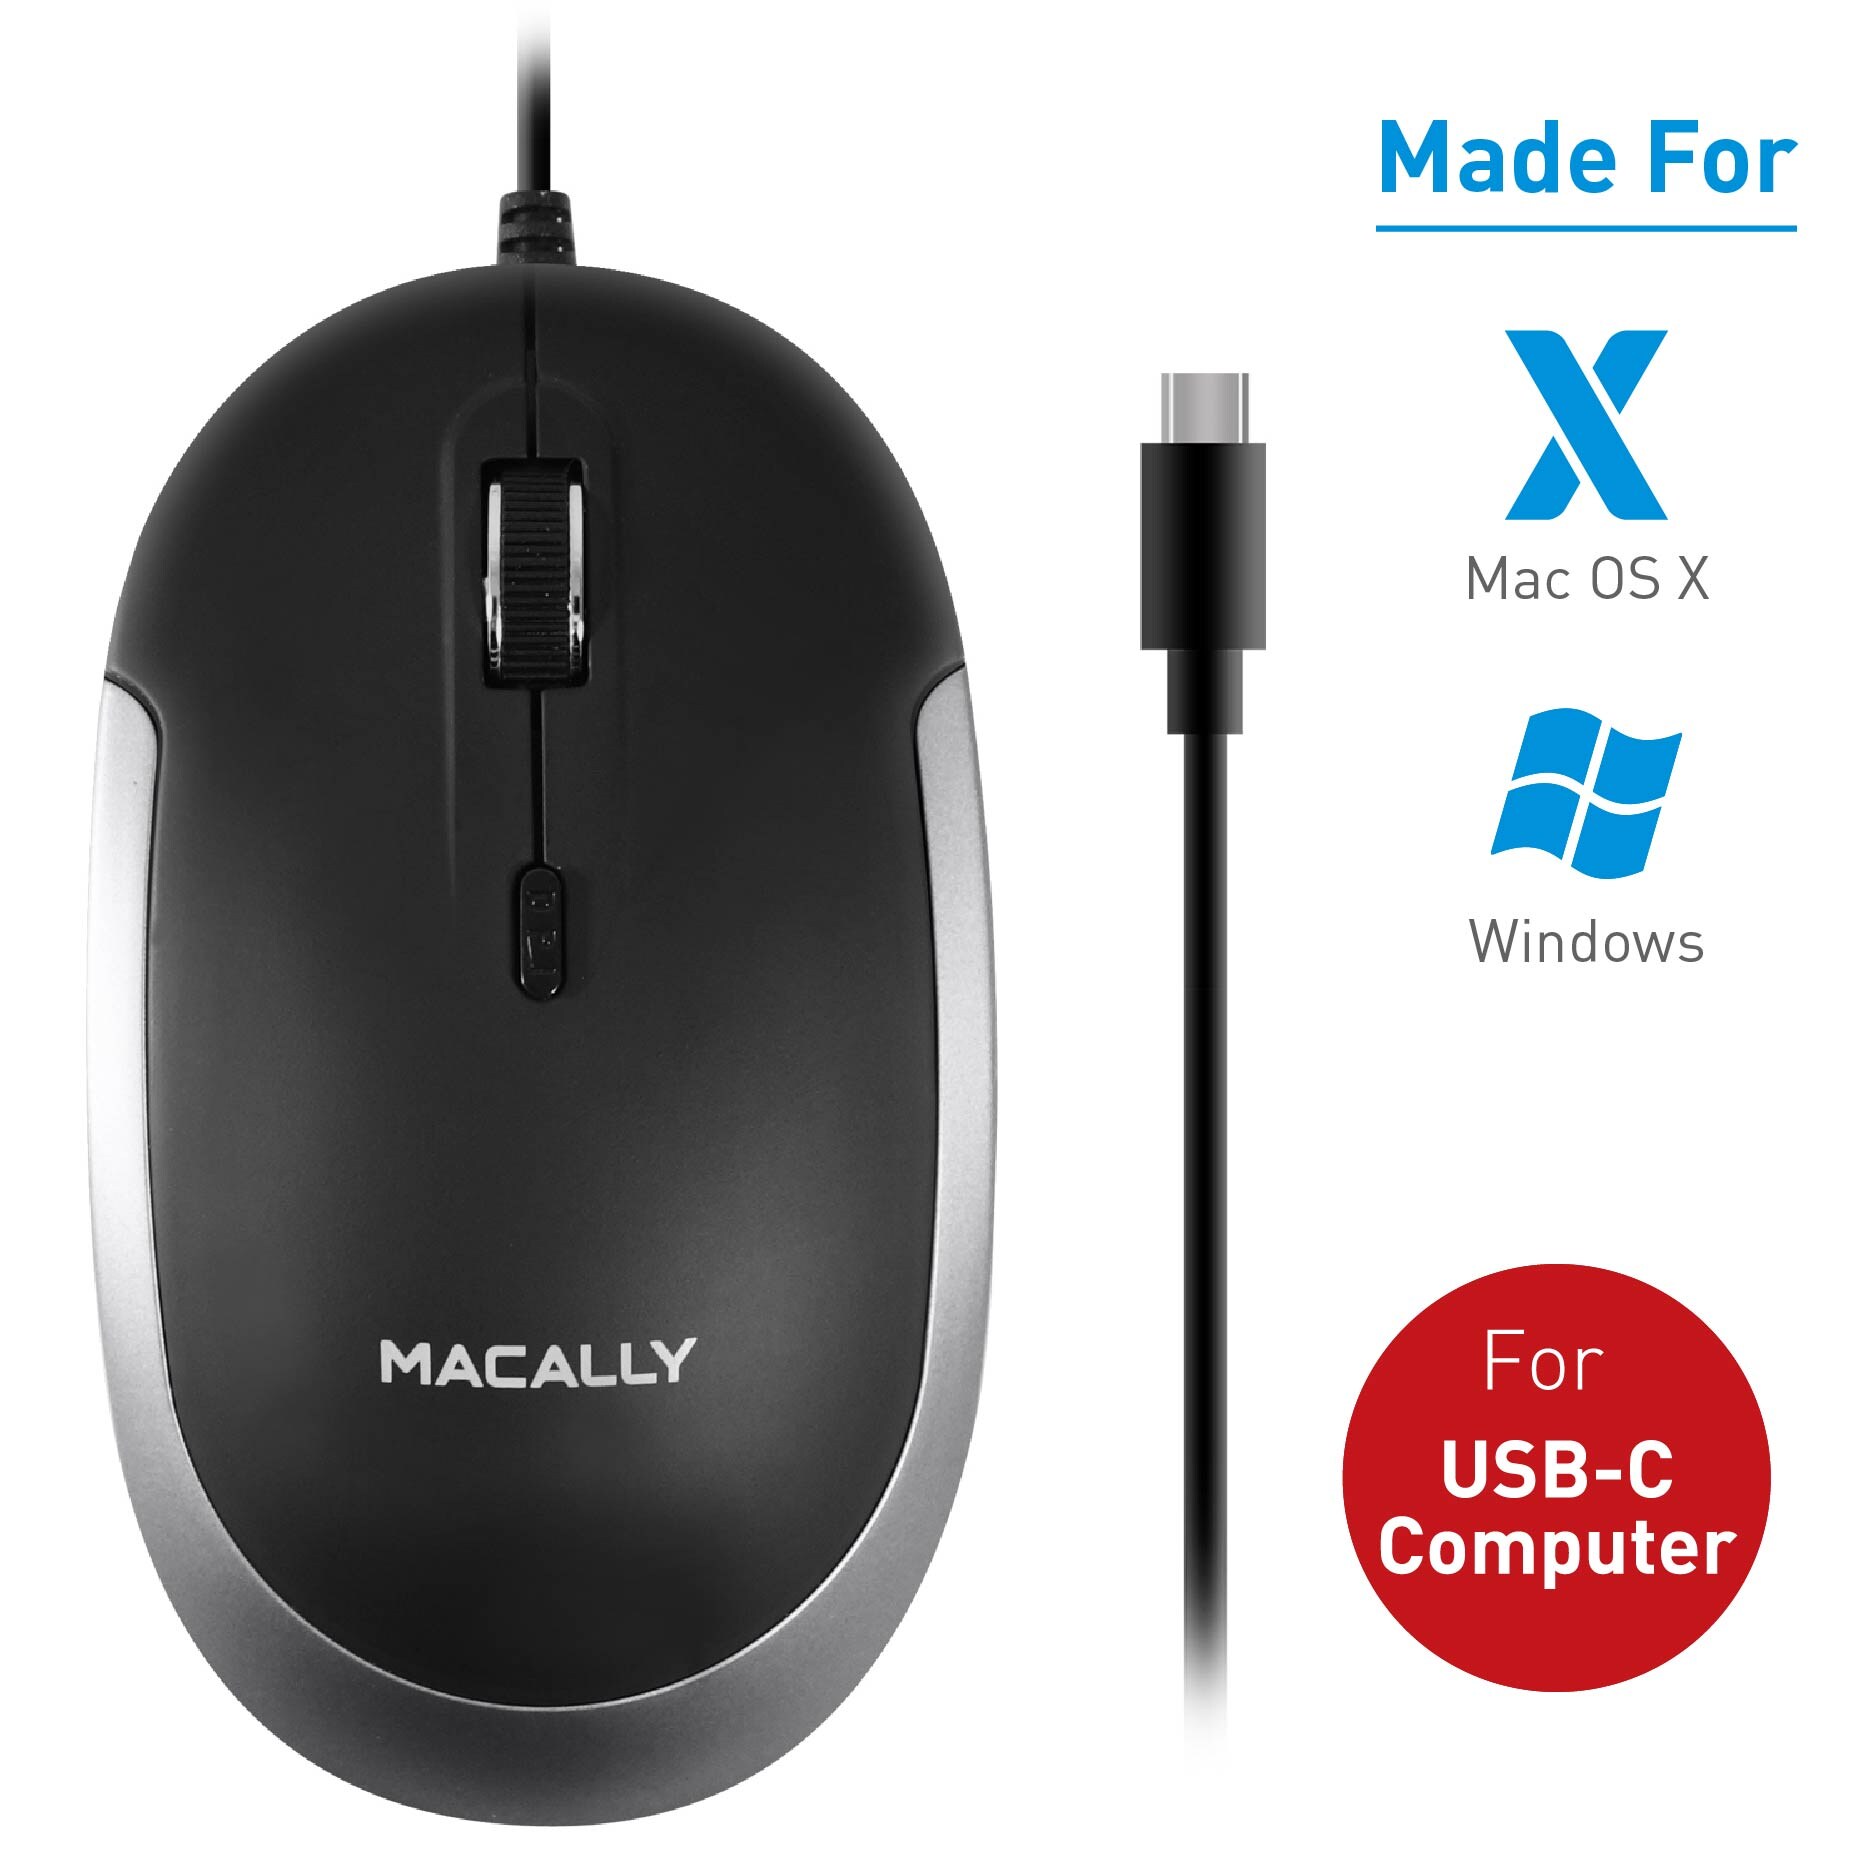 Macally Macally Silent USB Type C Space Gray Mouse Wired for Apple Mac & Windows Laptop/Desktop Computer | Slim & Compact Mice Design & Optical Sensor & DPI Switch 800/1200/1600/2400